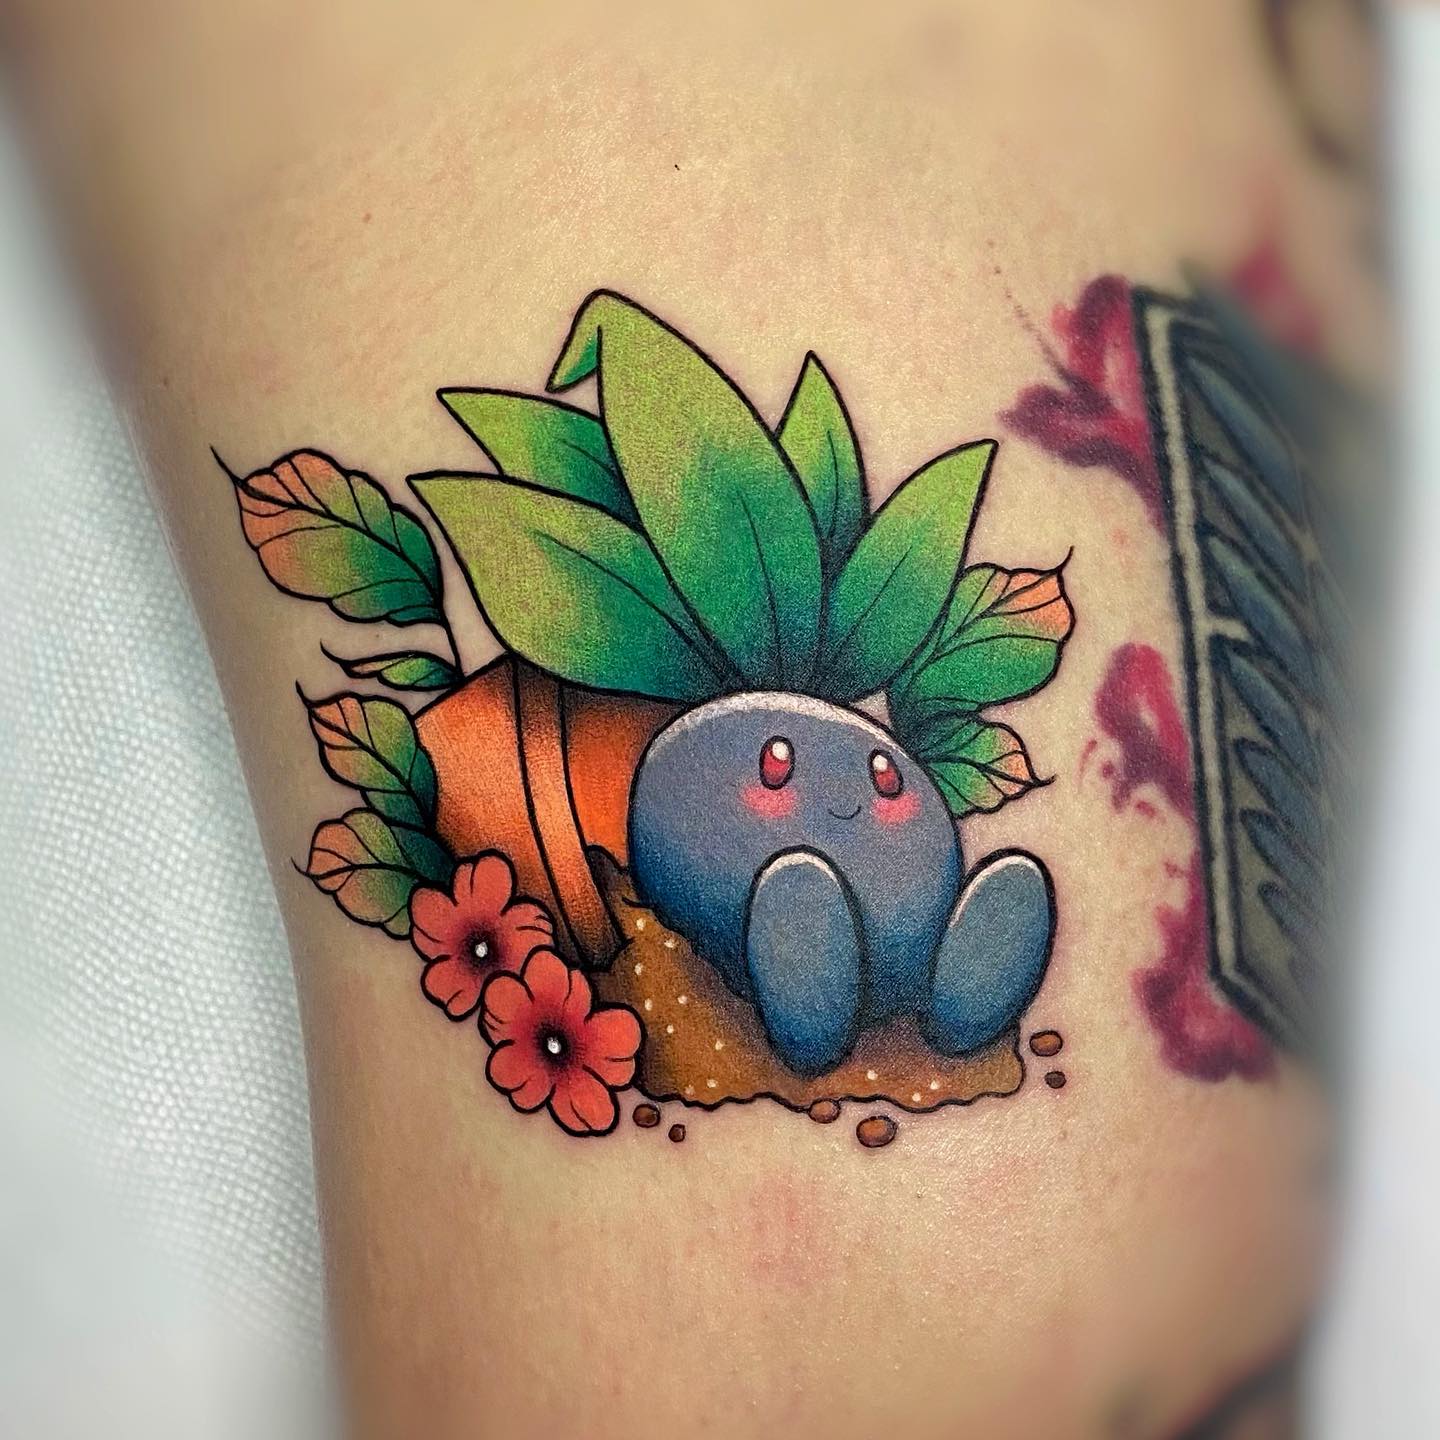 The tattoo above is a grass type pokemon that evolves into gloom and then into vileplume. It has a flower on its head that changes color depending on its mood. Plus, it looks super-cute.